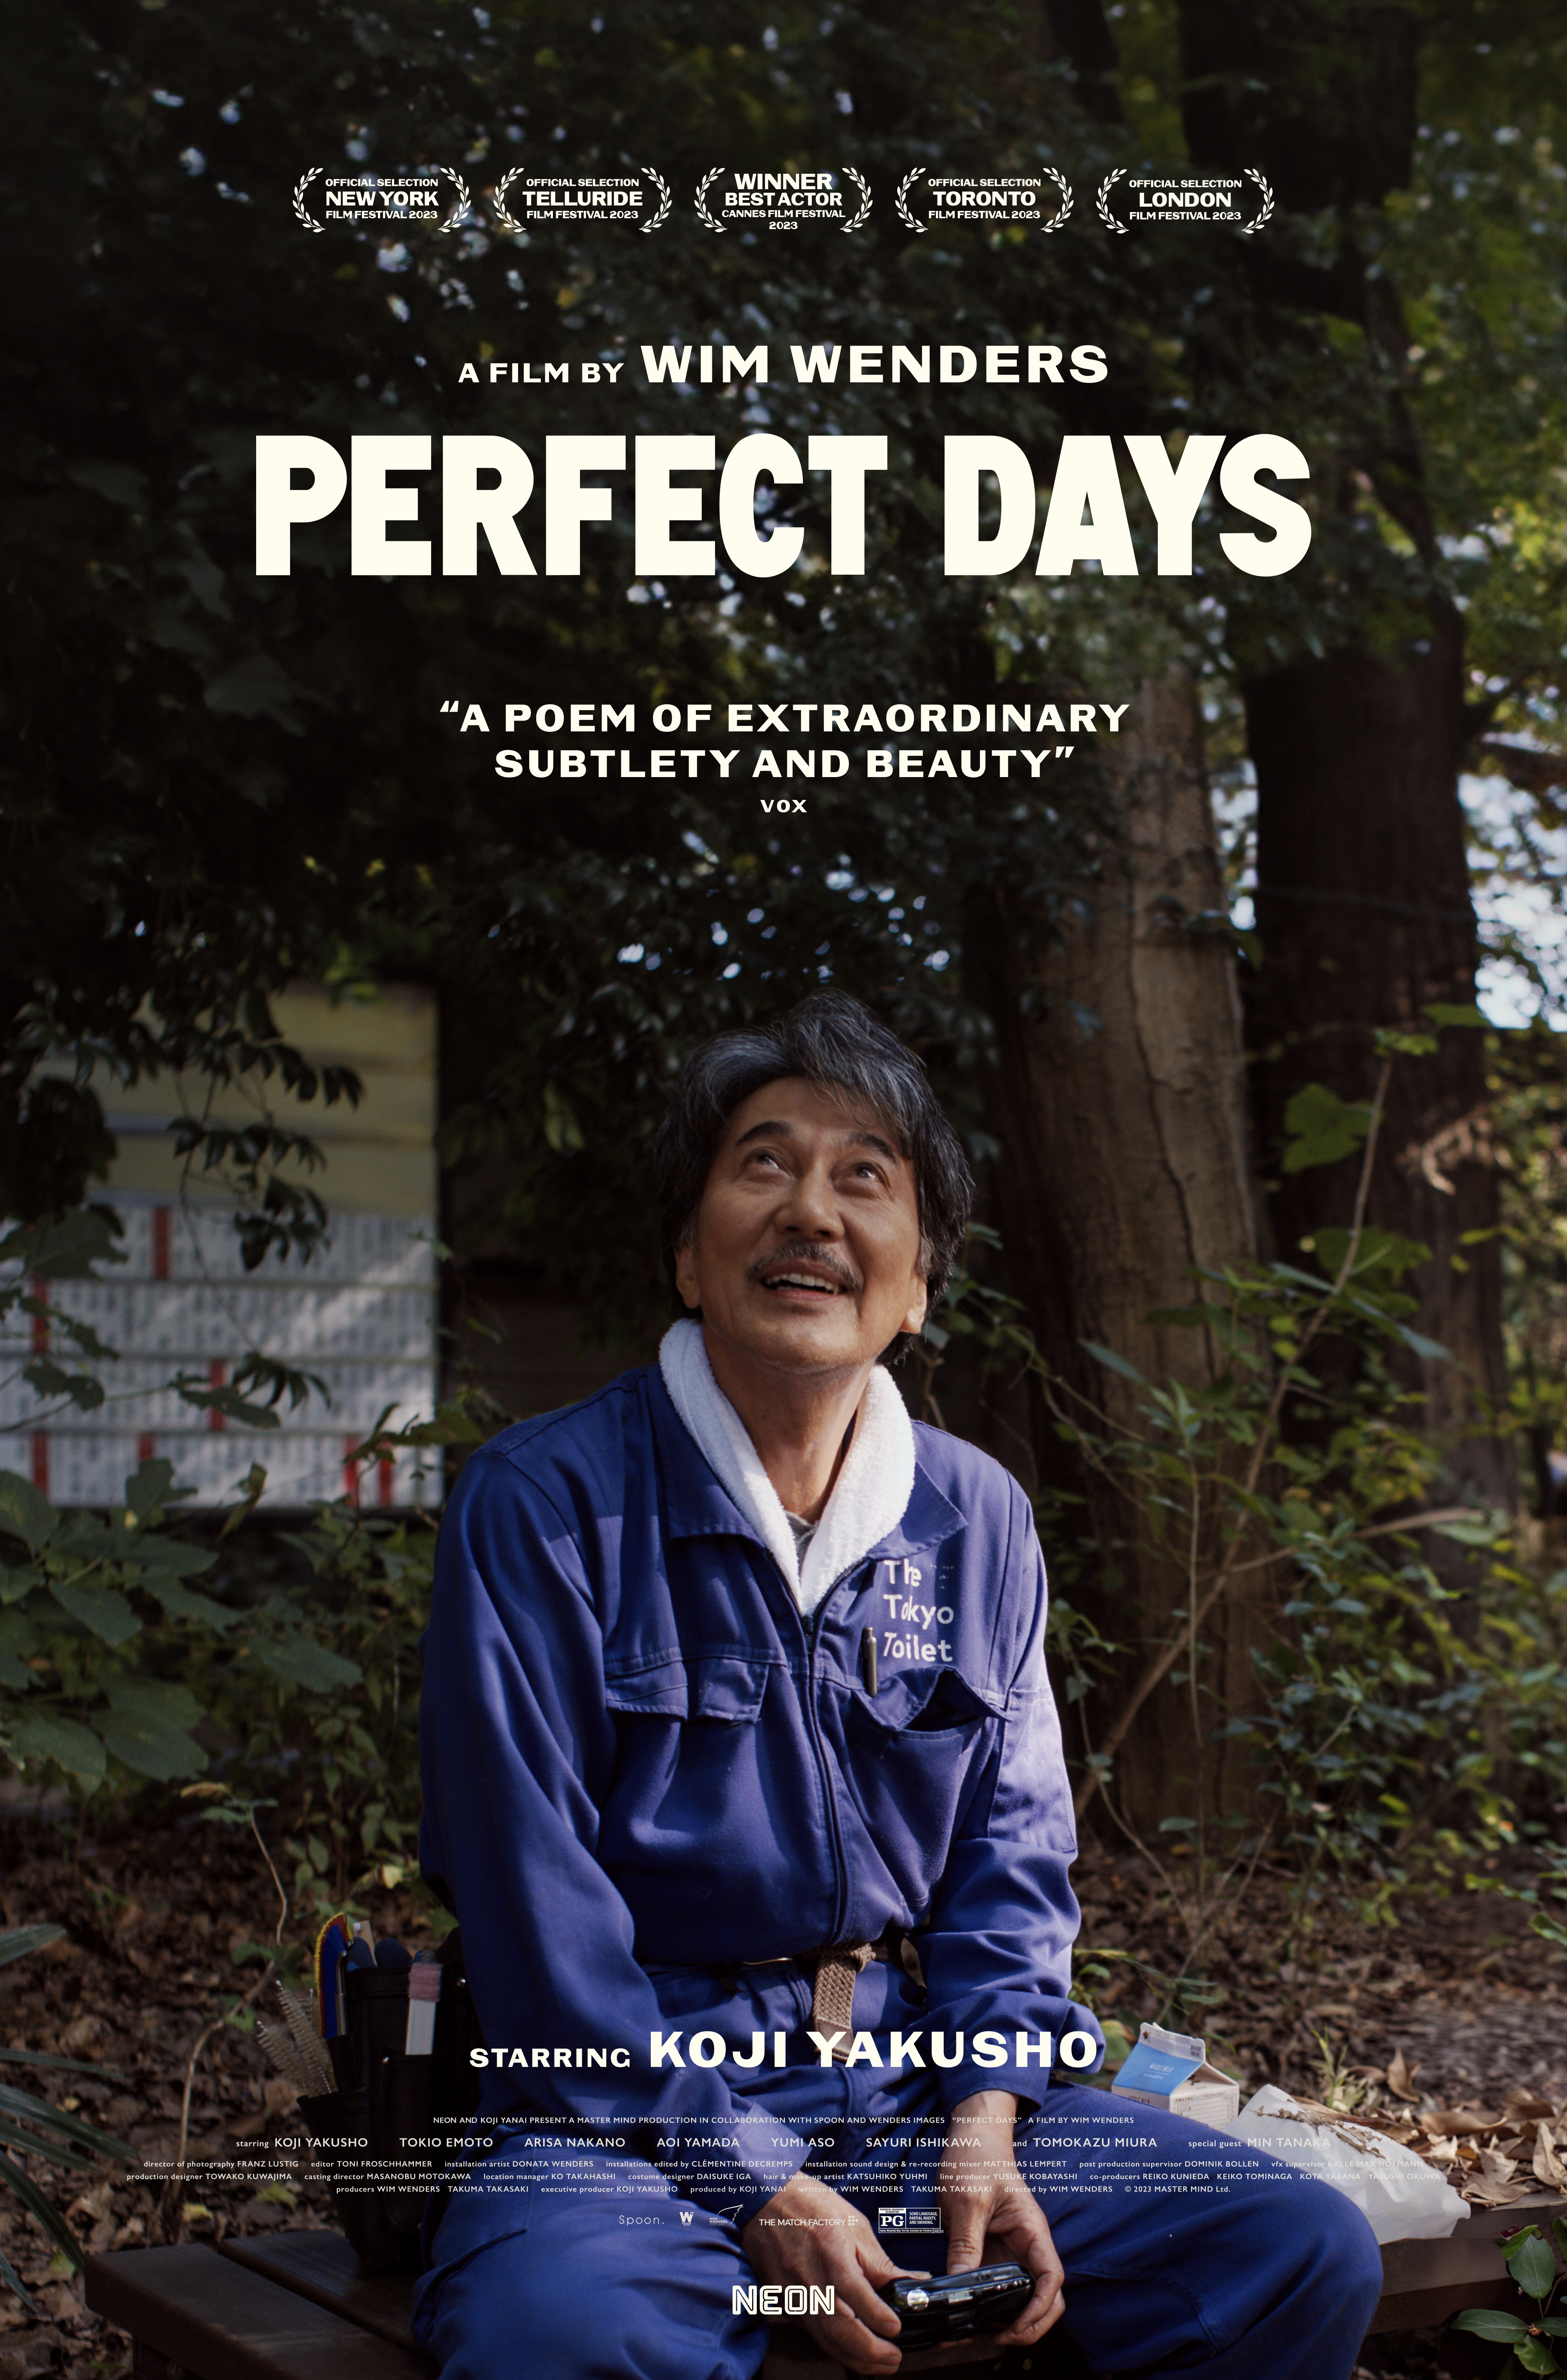 A photo of a Japanese man sitting under a tree, as he looks up smiling. The title, "Perfect Days